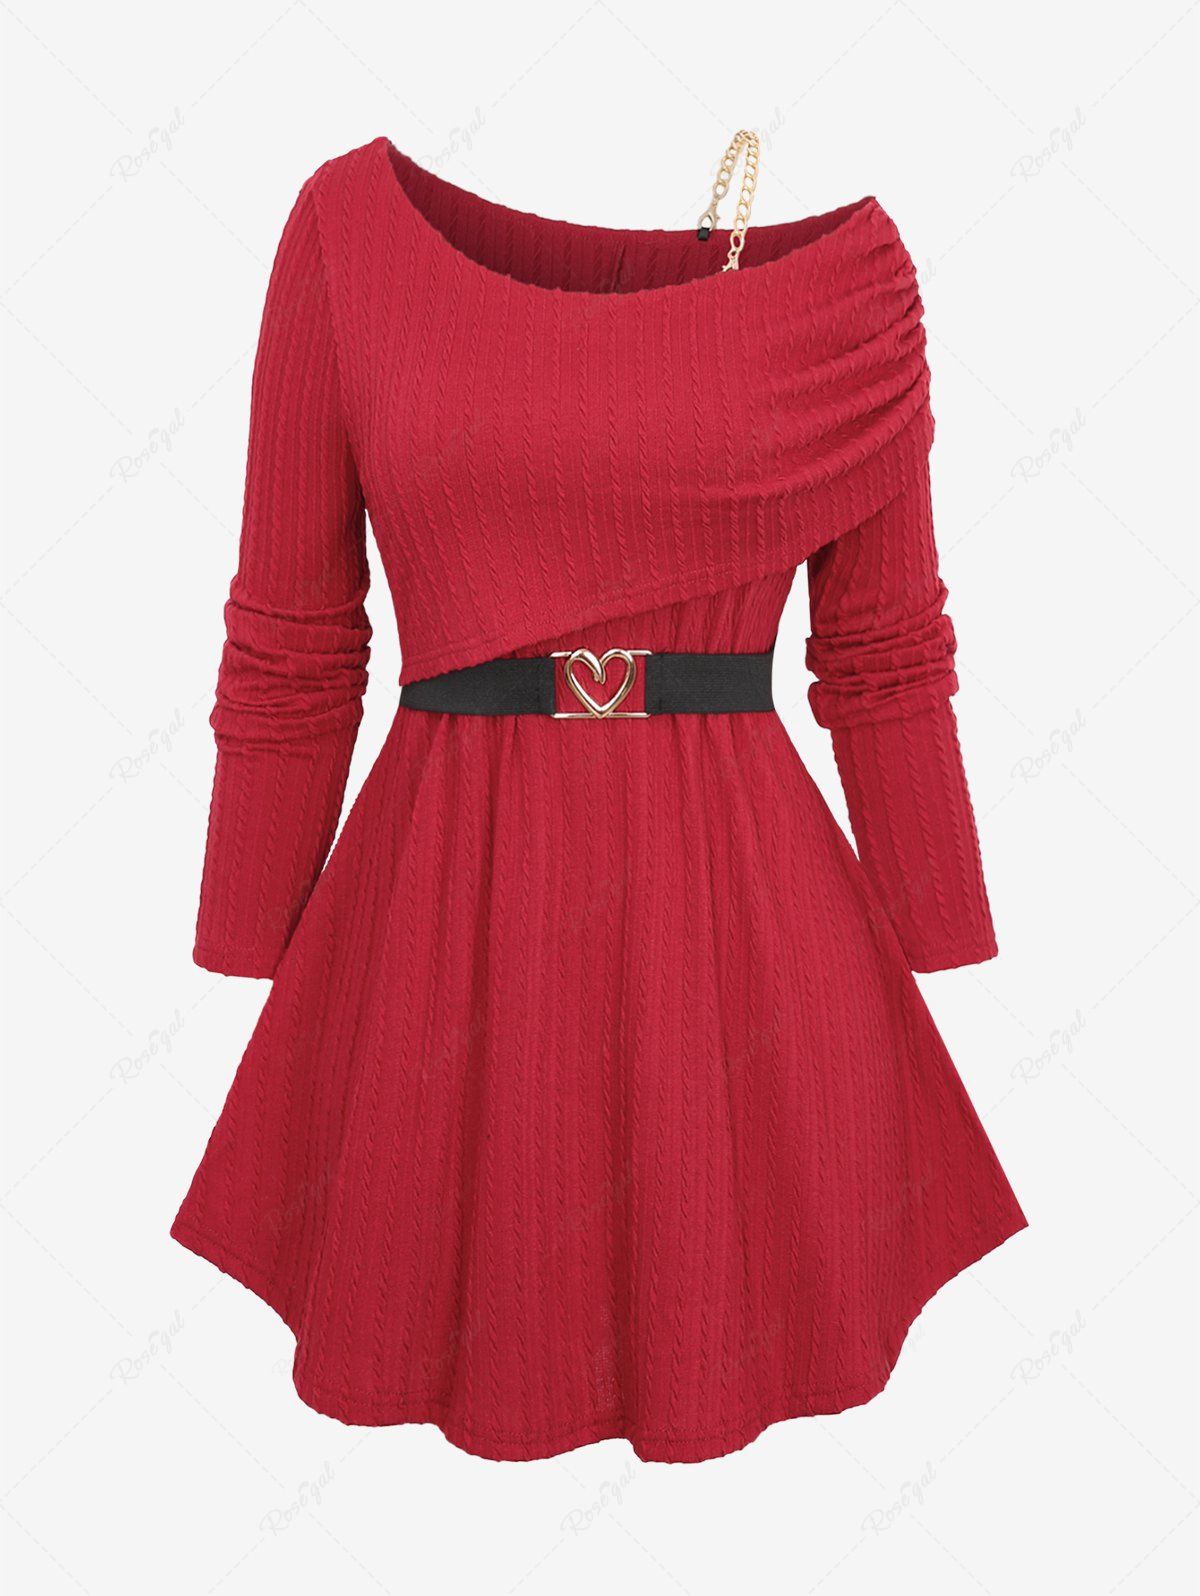 Trendy Plus Size One Shoulder Textured Ribbed Cinched Solid Long Sleeves Knit Top with Removeble Chain and Heart Buckle Belt  